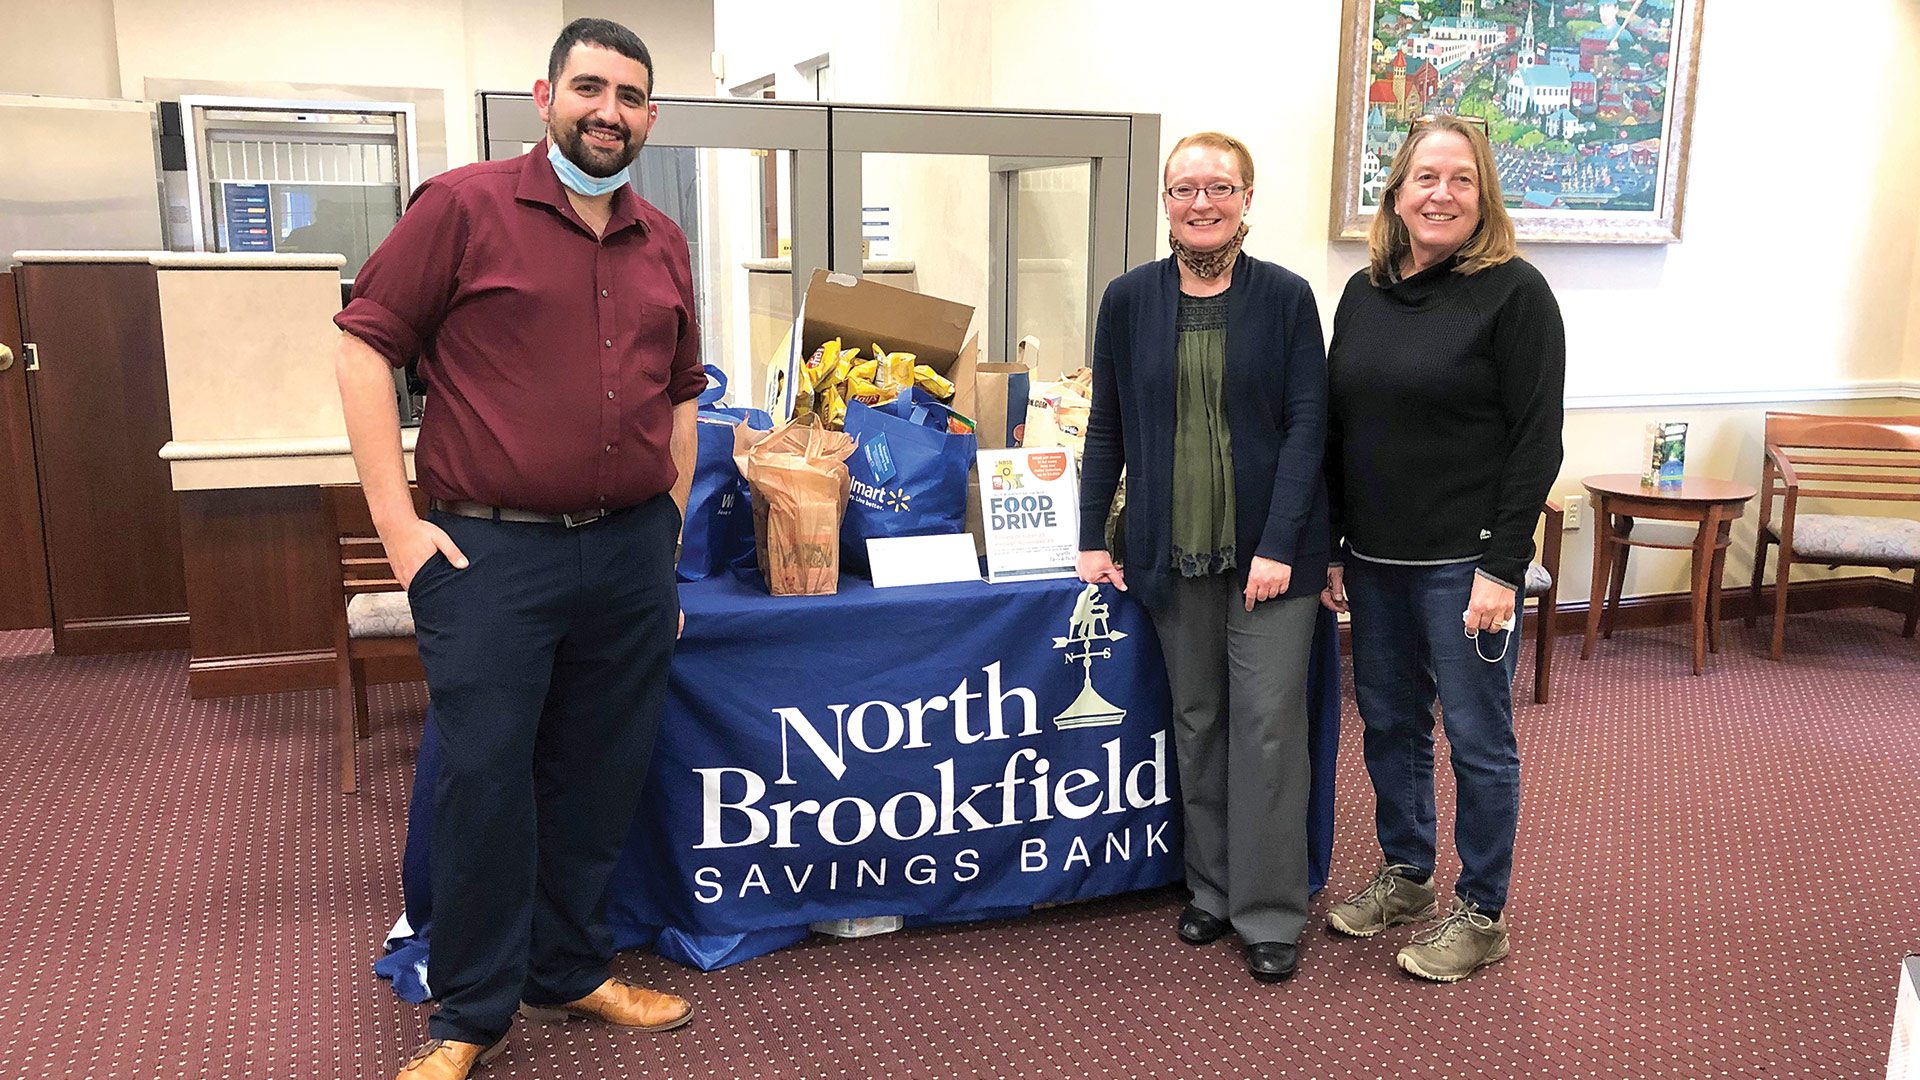 North Brookfield Savings Bank is holding a food drive and fundraiser from Oct. 1 through Oct. 31